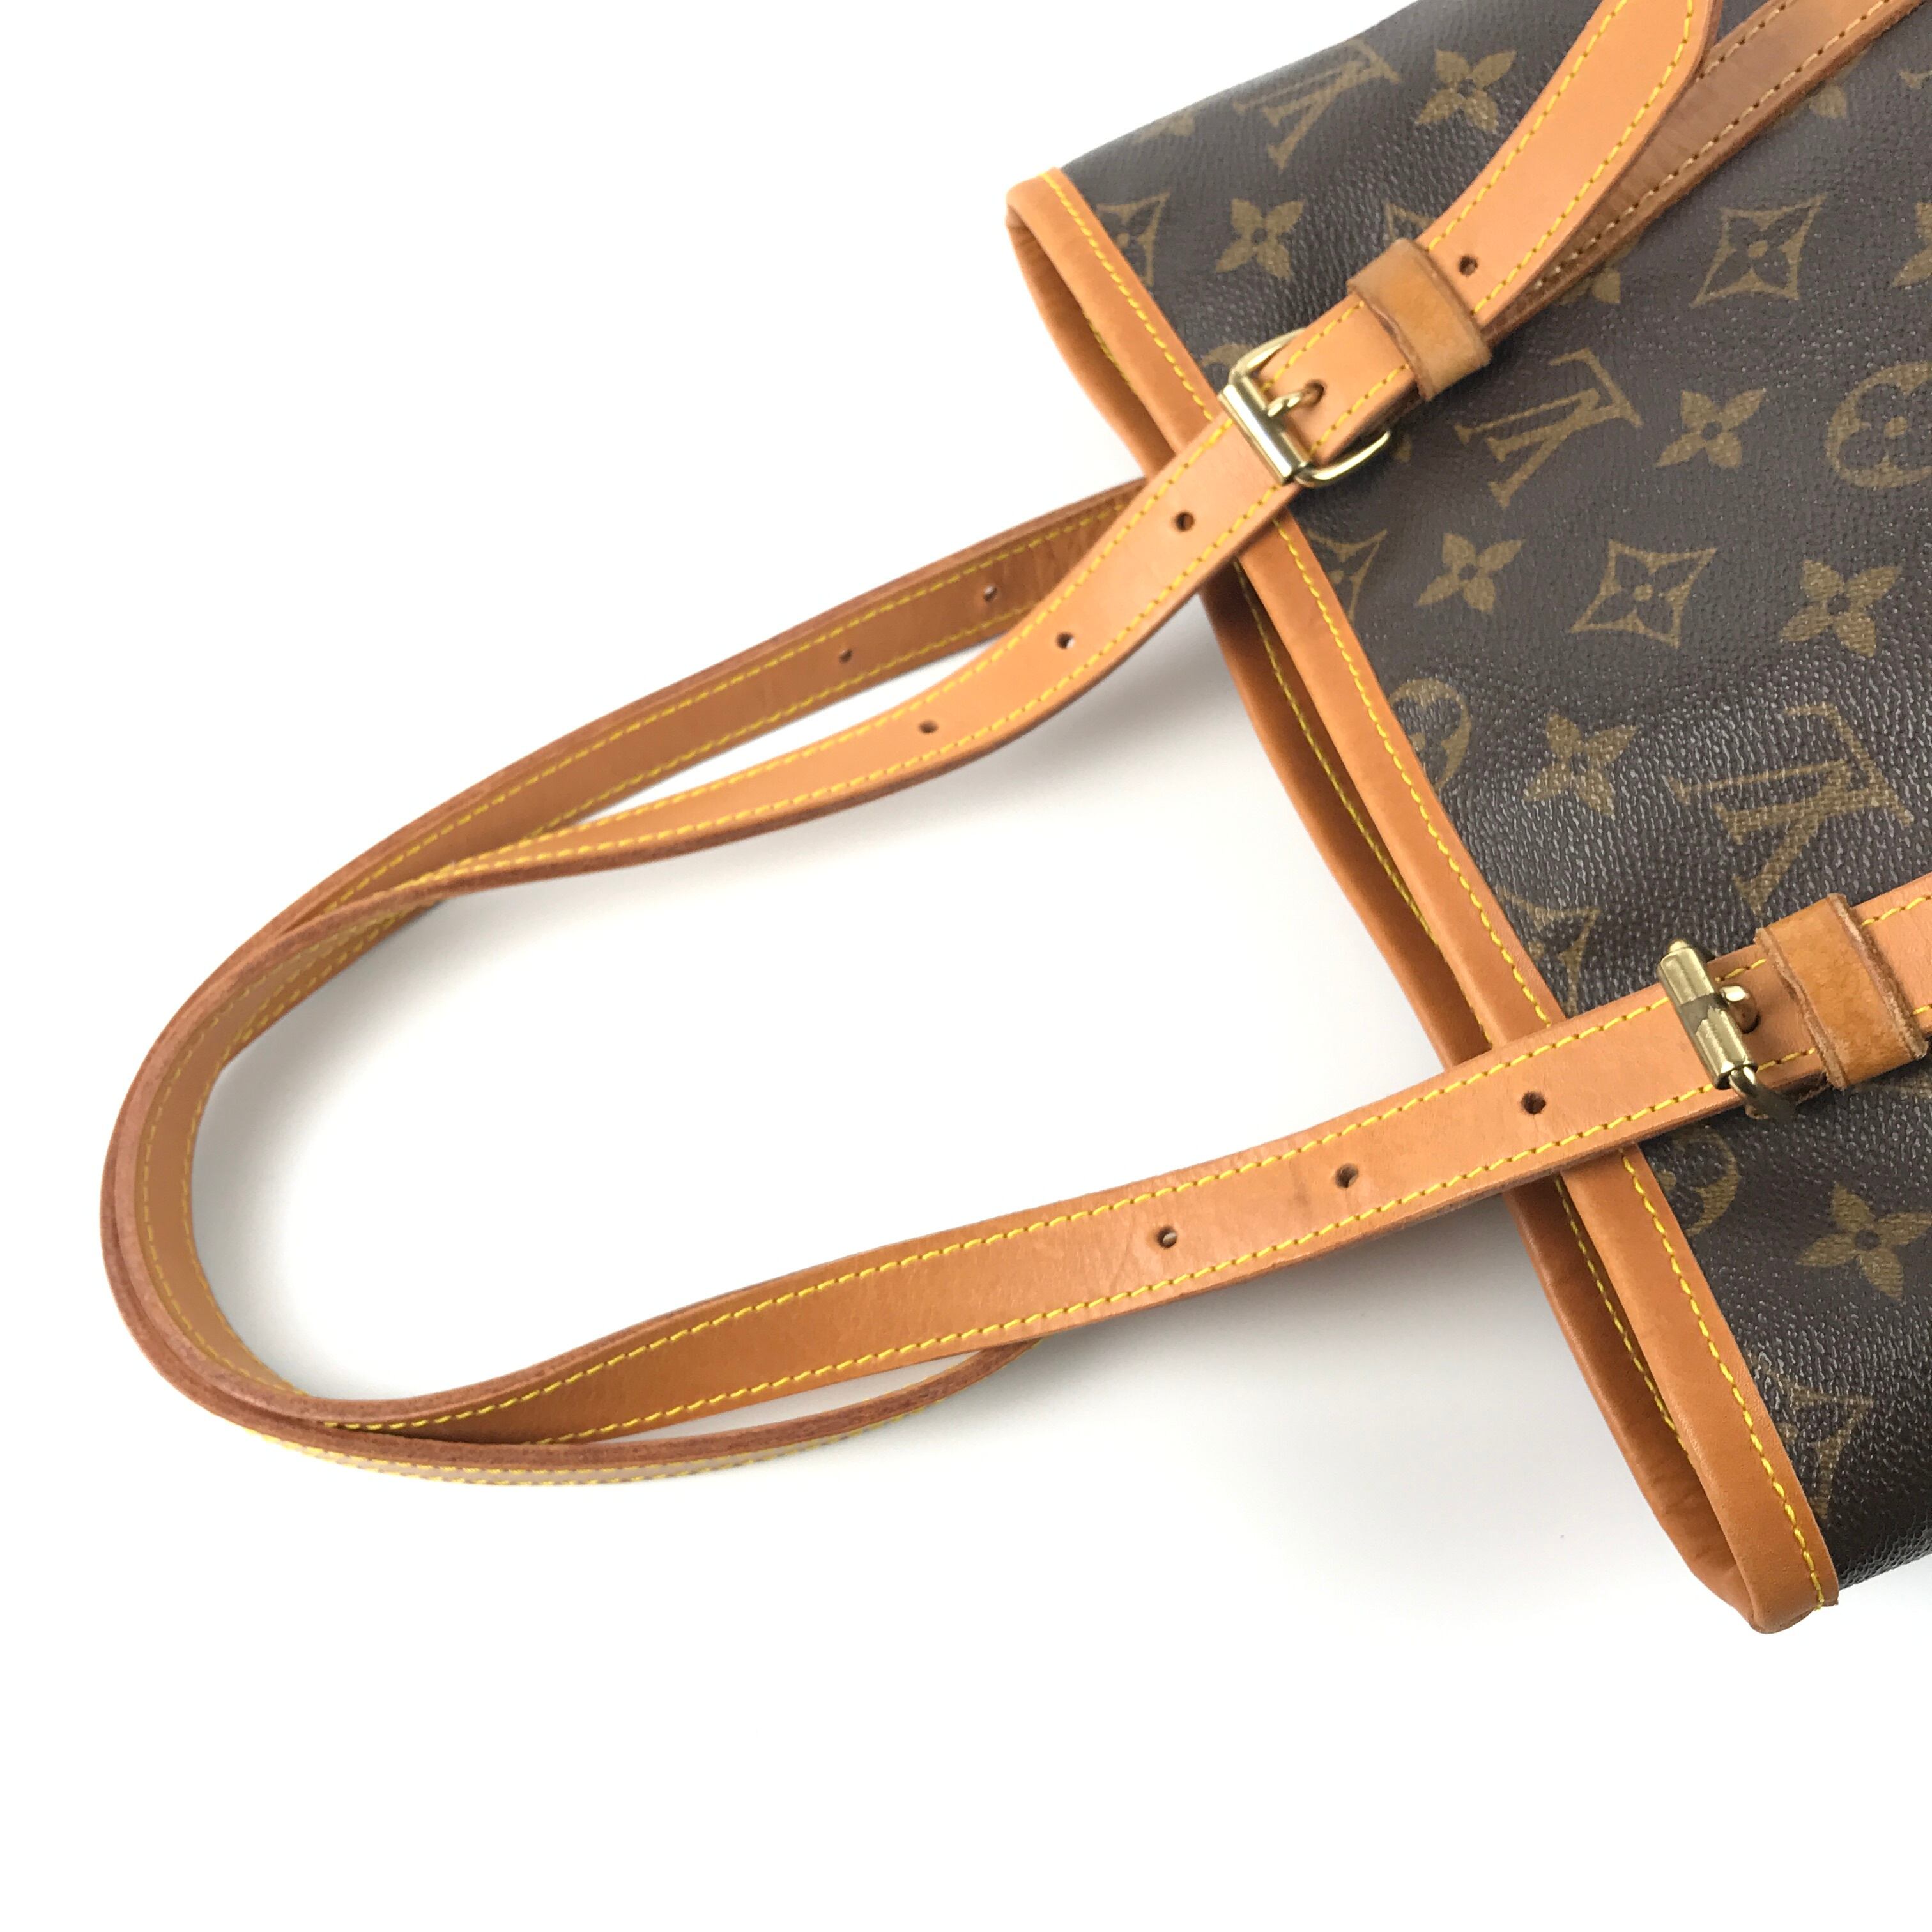 LOUIS VUITTON 　ルイ ヴィトン　モノグラム　バケット GM　トートバッグ　バケツ　バッグ　ポーチ　M42236　ブラウン　vintage　 ヴィンテージ　mdwnn4 | VintageShop solo powered by BASE